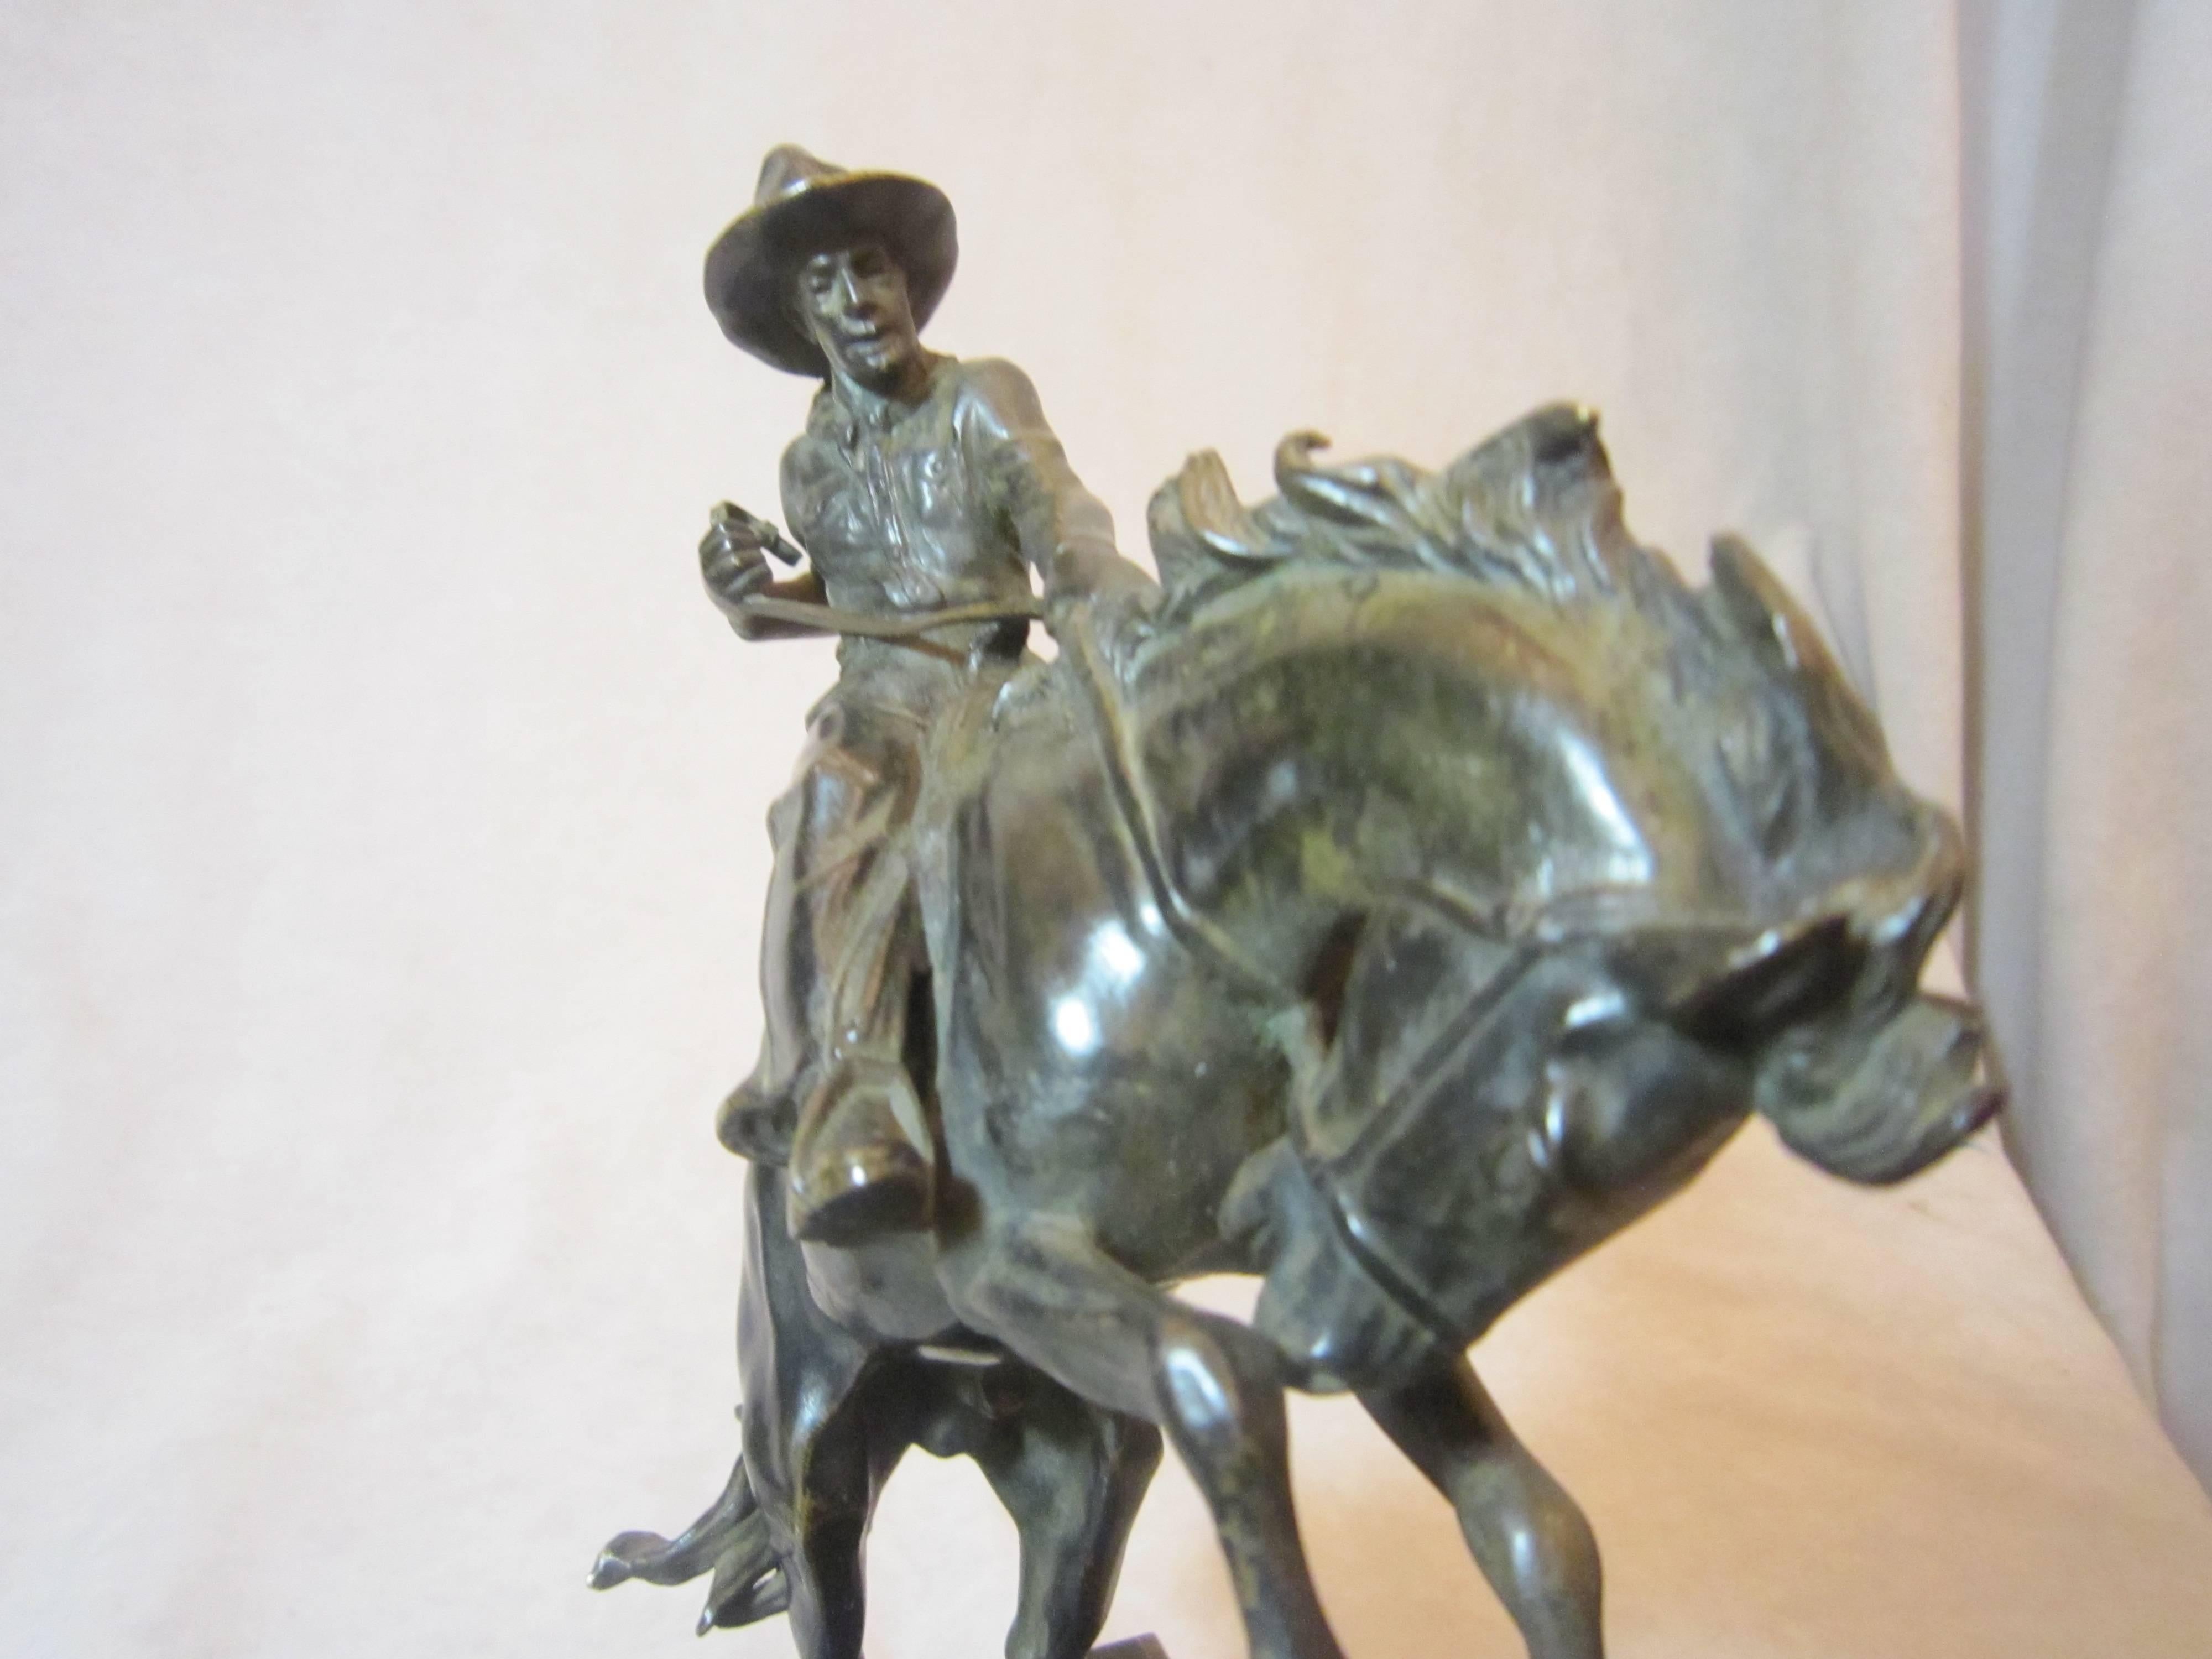 This sought after subject of a cowboy on a horse is from the early 1900s and is well modeled and a true piece of American history. It is artist signed 